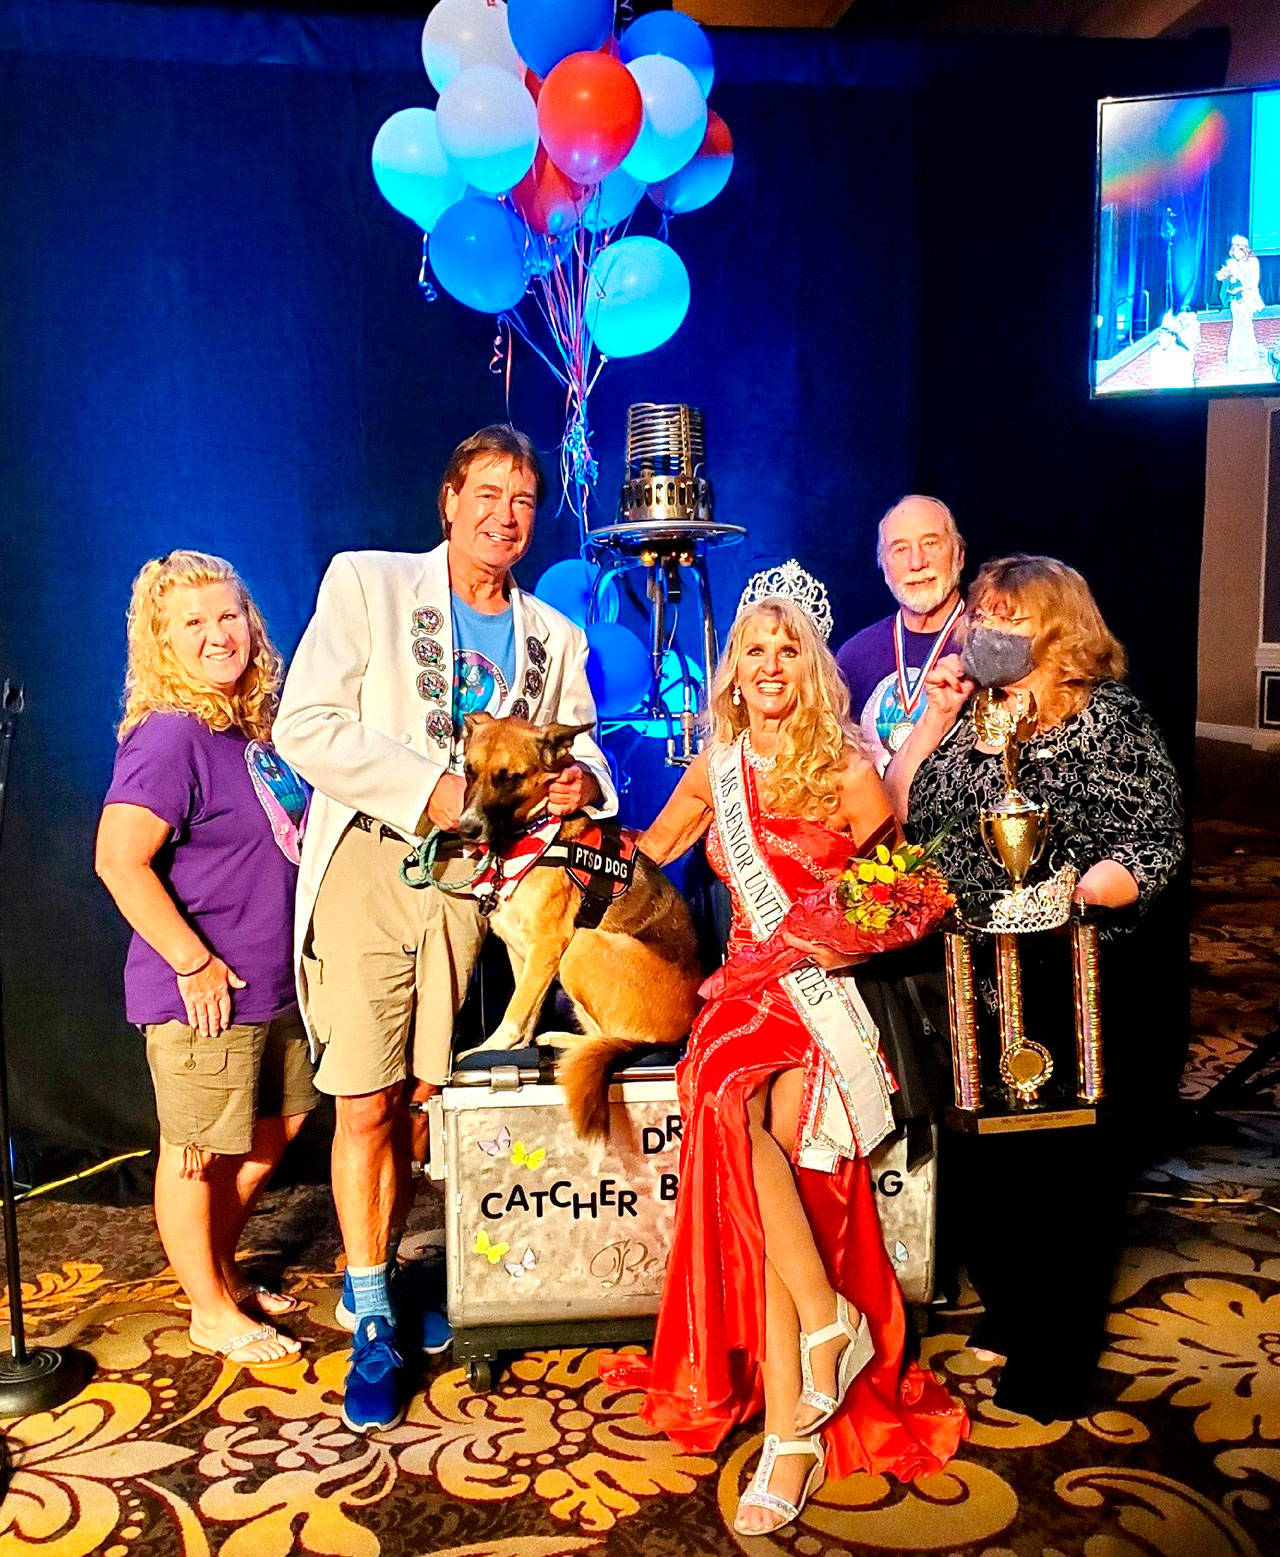 The Dream Catcher Balloon Program team celebrates Captain-Crystal Stout, third from left, winning the Ms. Senior United States title on Oct. 8 in Las Vegas. Included in the picture are, from left, Teresa Stout of Sequim), Brian St. Ours of Sequim, Lucee Light the therapy dog, Crystal Stout, Bob Holt of Sequim, and Ginger Johnson of Las Vegas. Photo courtesy of Captain-Crystal Stout